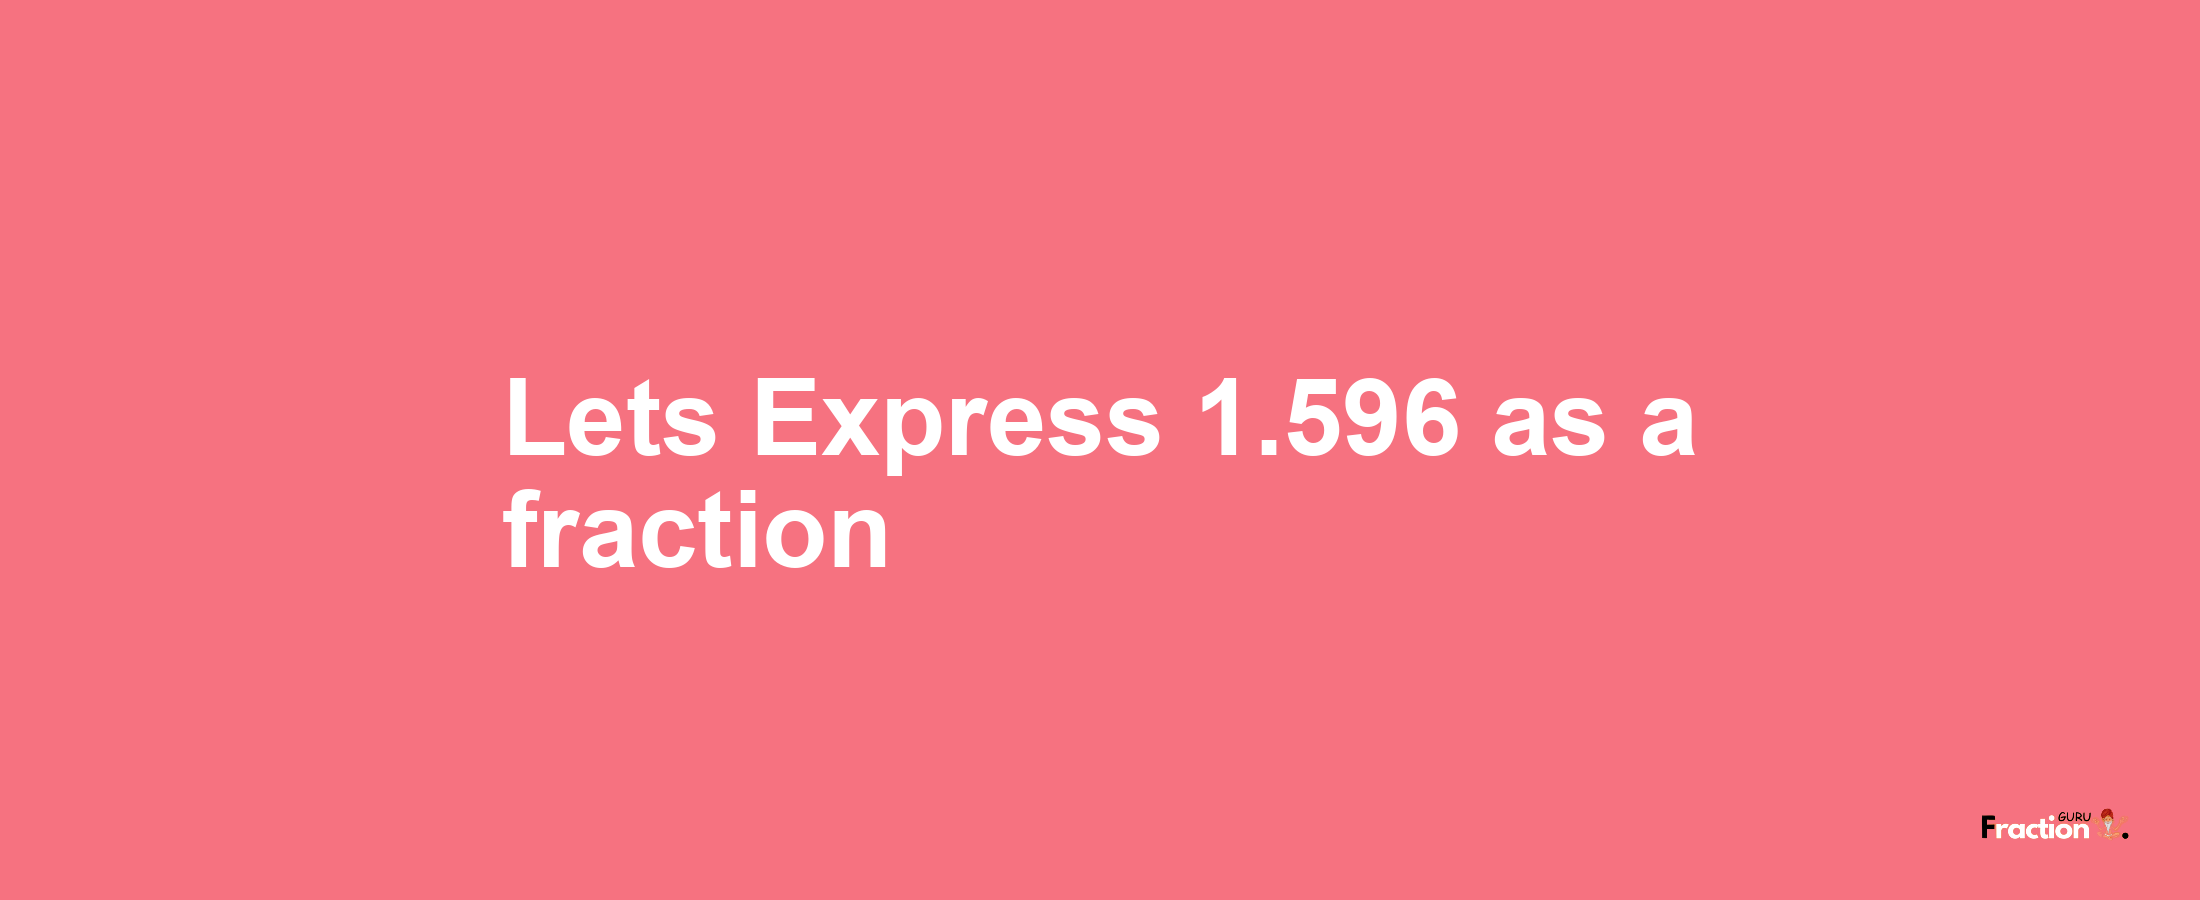 Lets Express 1.596 as afraction